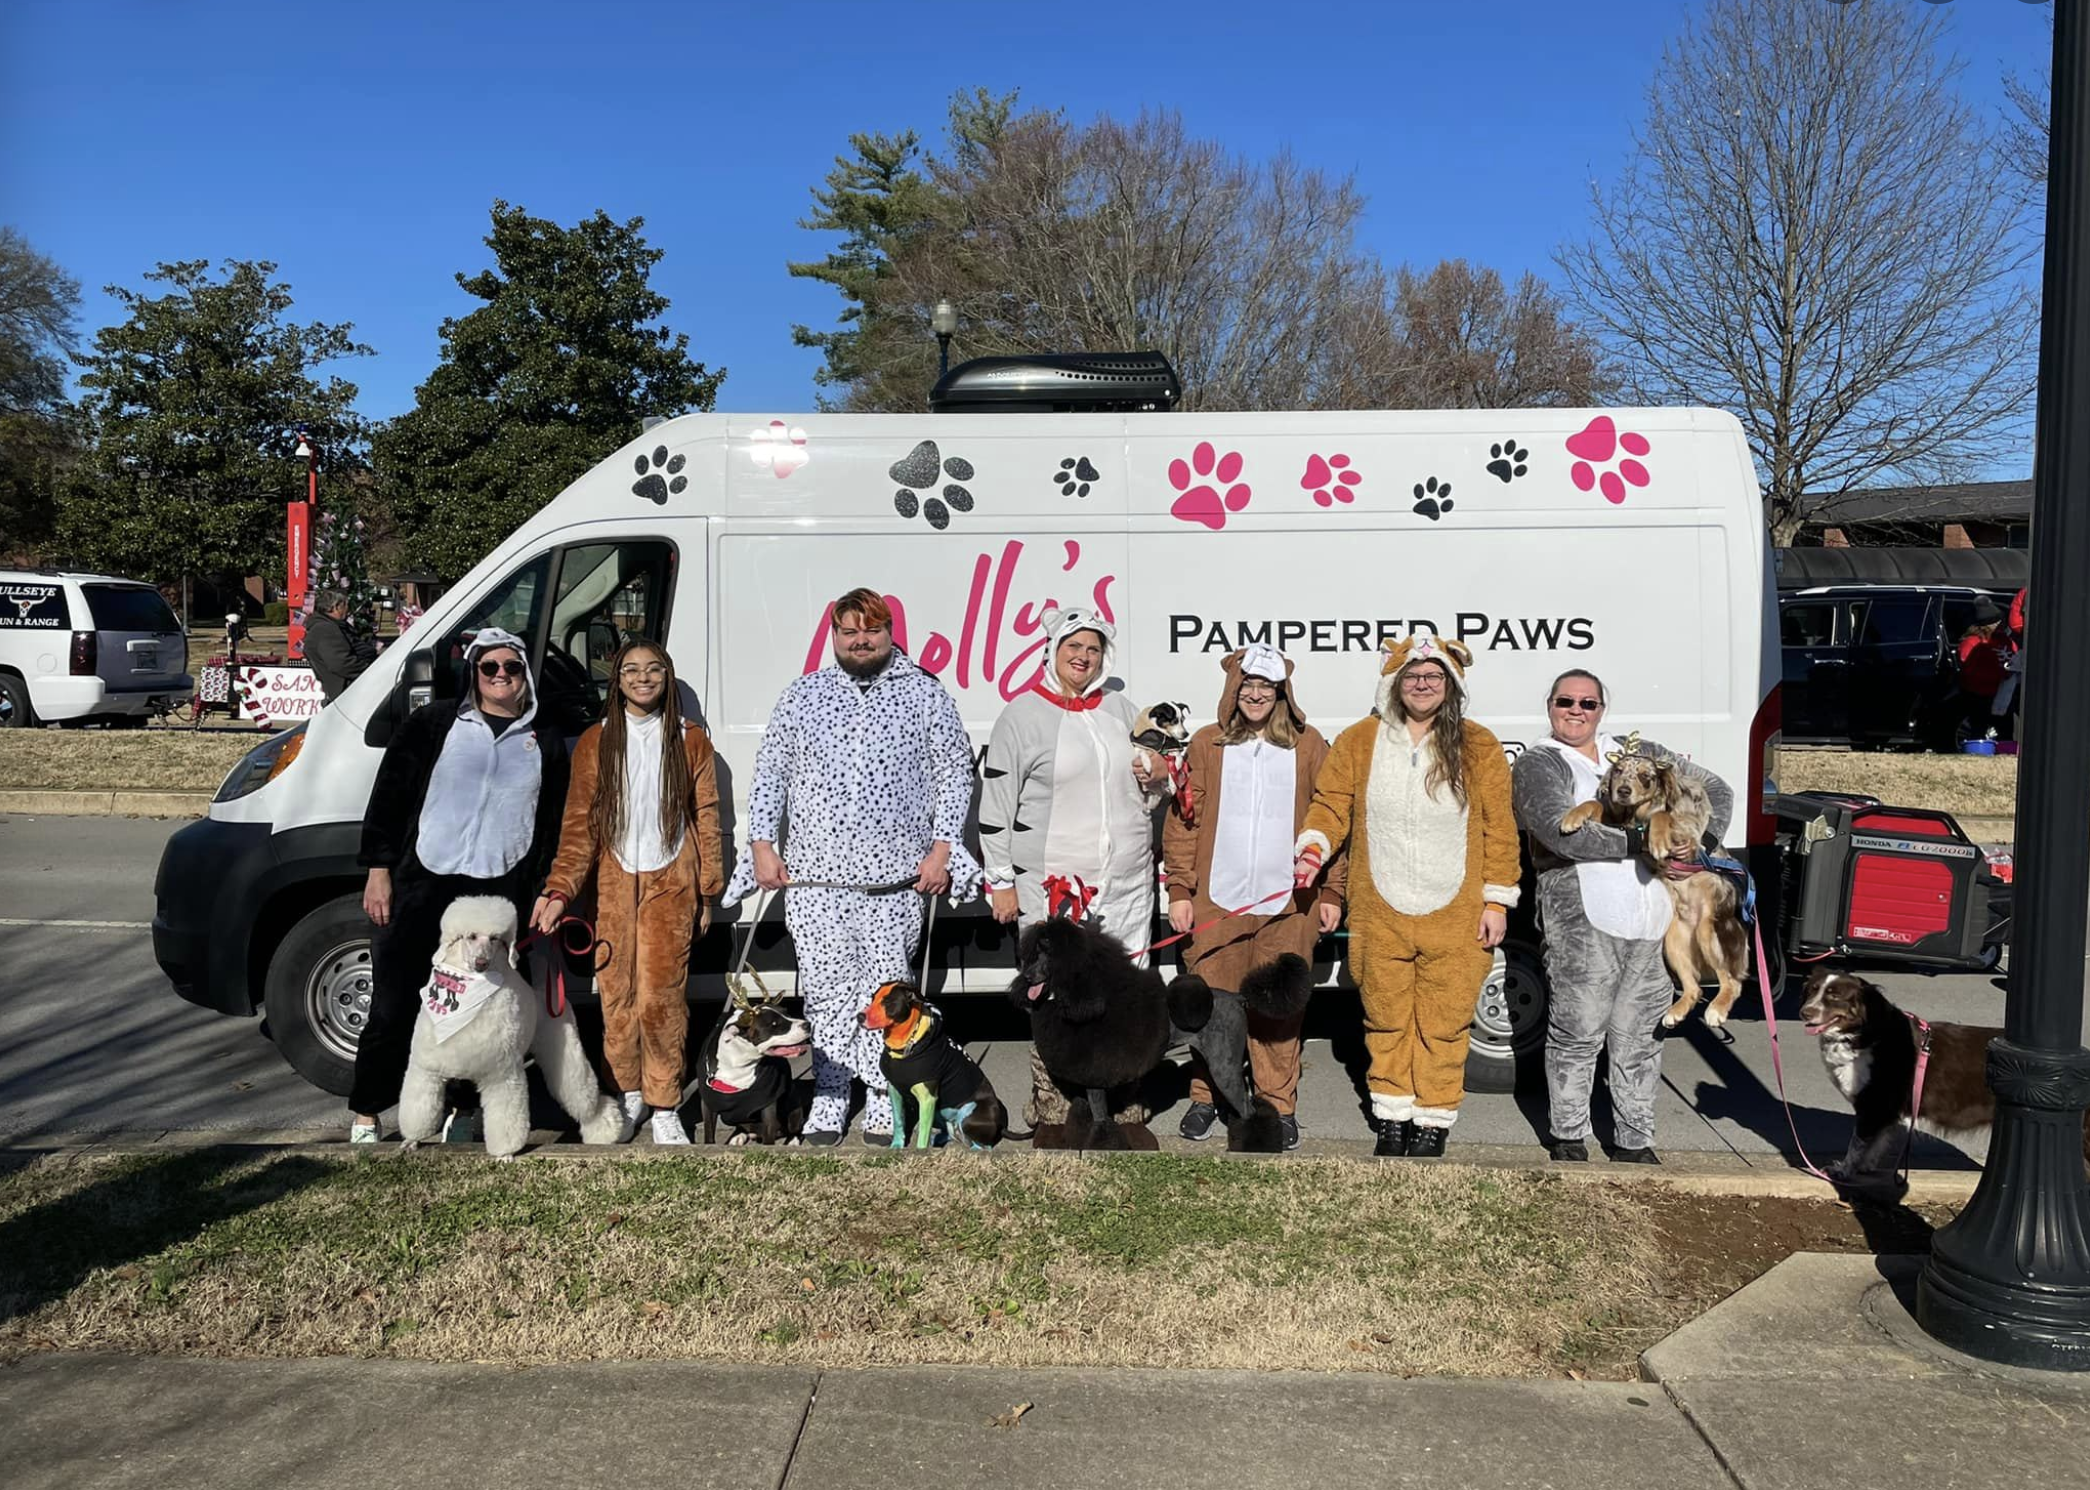 Molly's Pampered Paws during their Christmas Parade